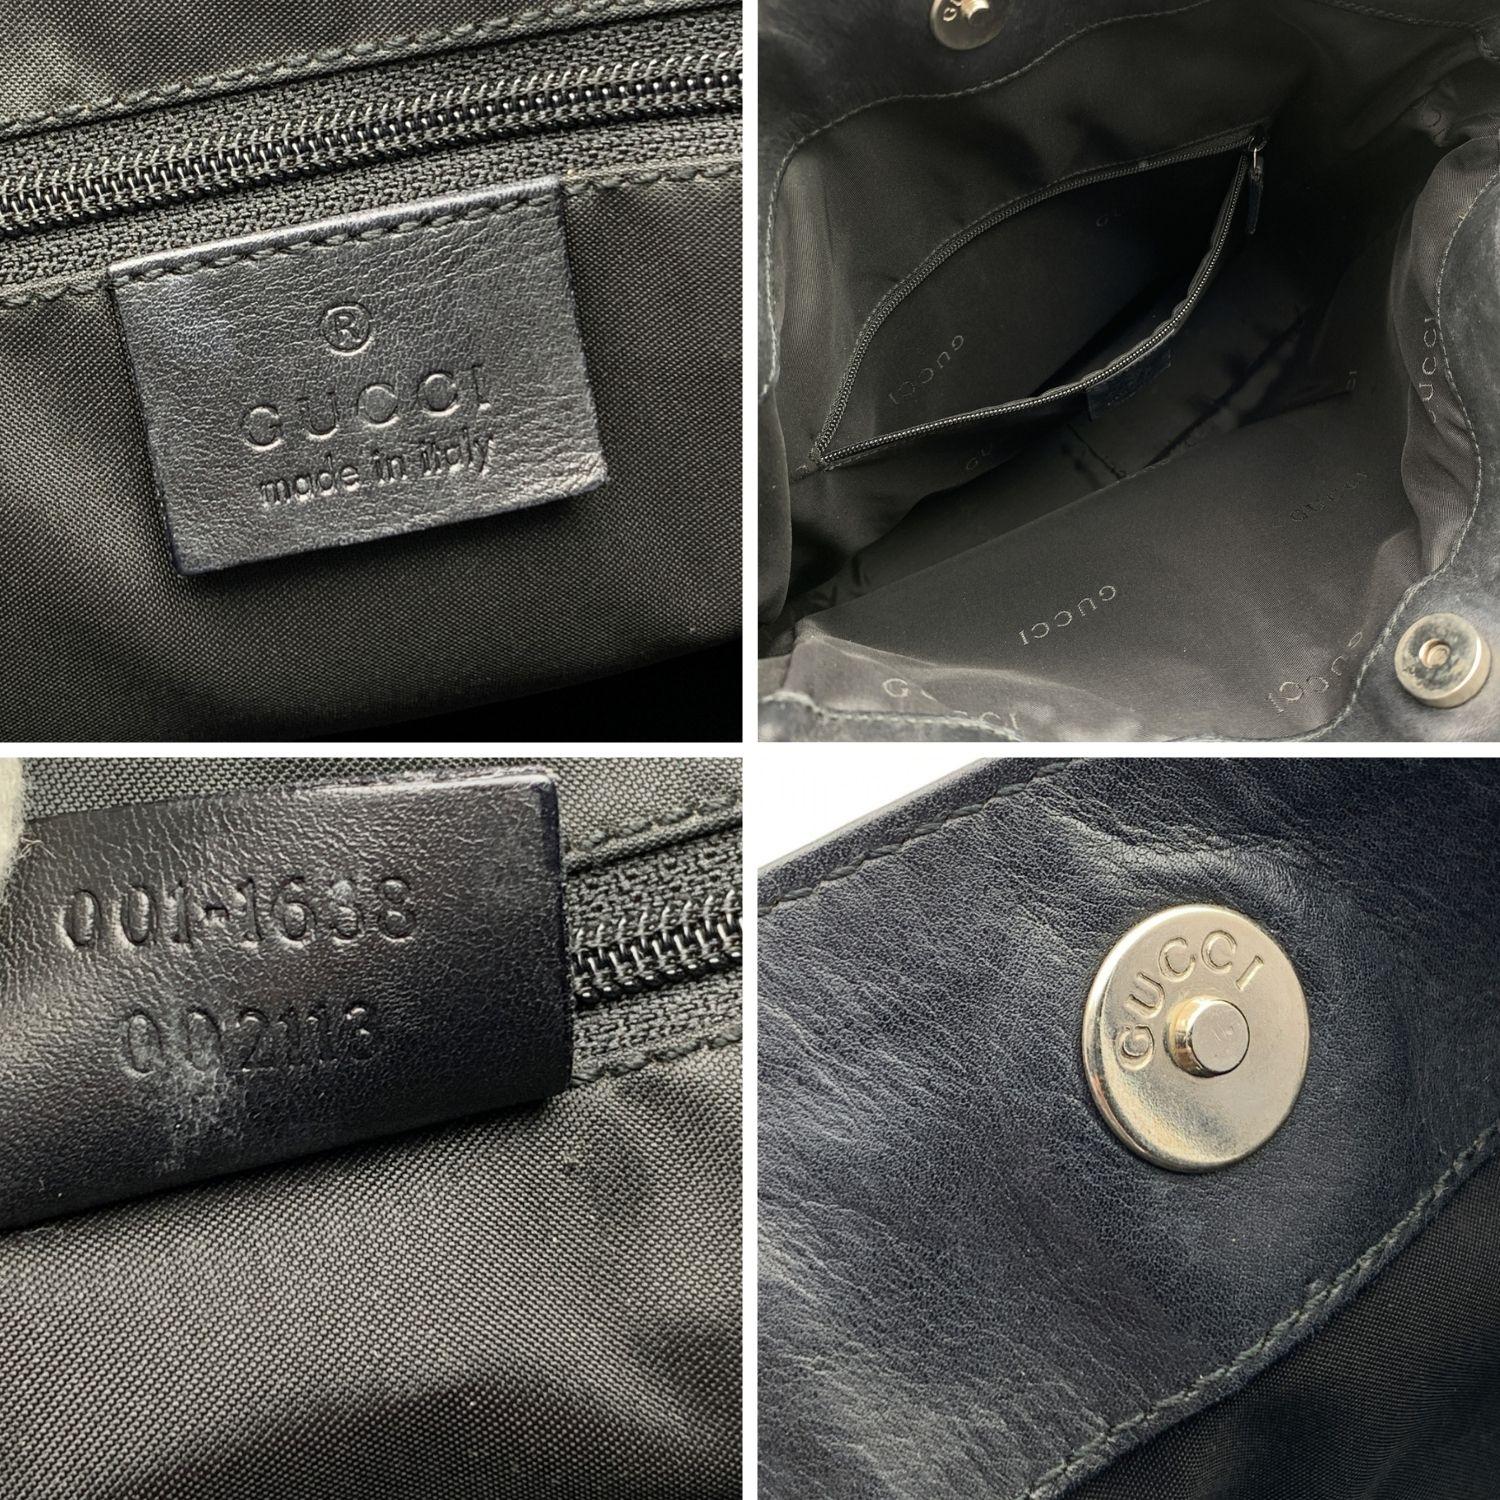 Beautiful Gucci Bamboo tote bag in black leather. Silver metal hardware. Distinctive Bamboo handle. Magnetic button closure on top. Black fabric lining. Zip pocket inside. 'Gucci - Made in Italy' tag inside (serial number on its